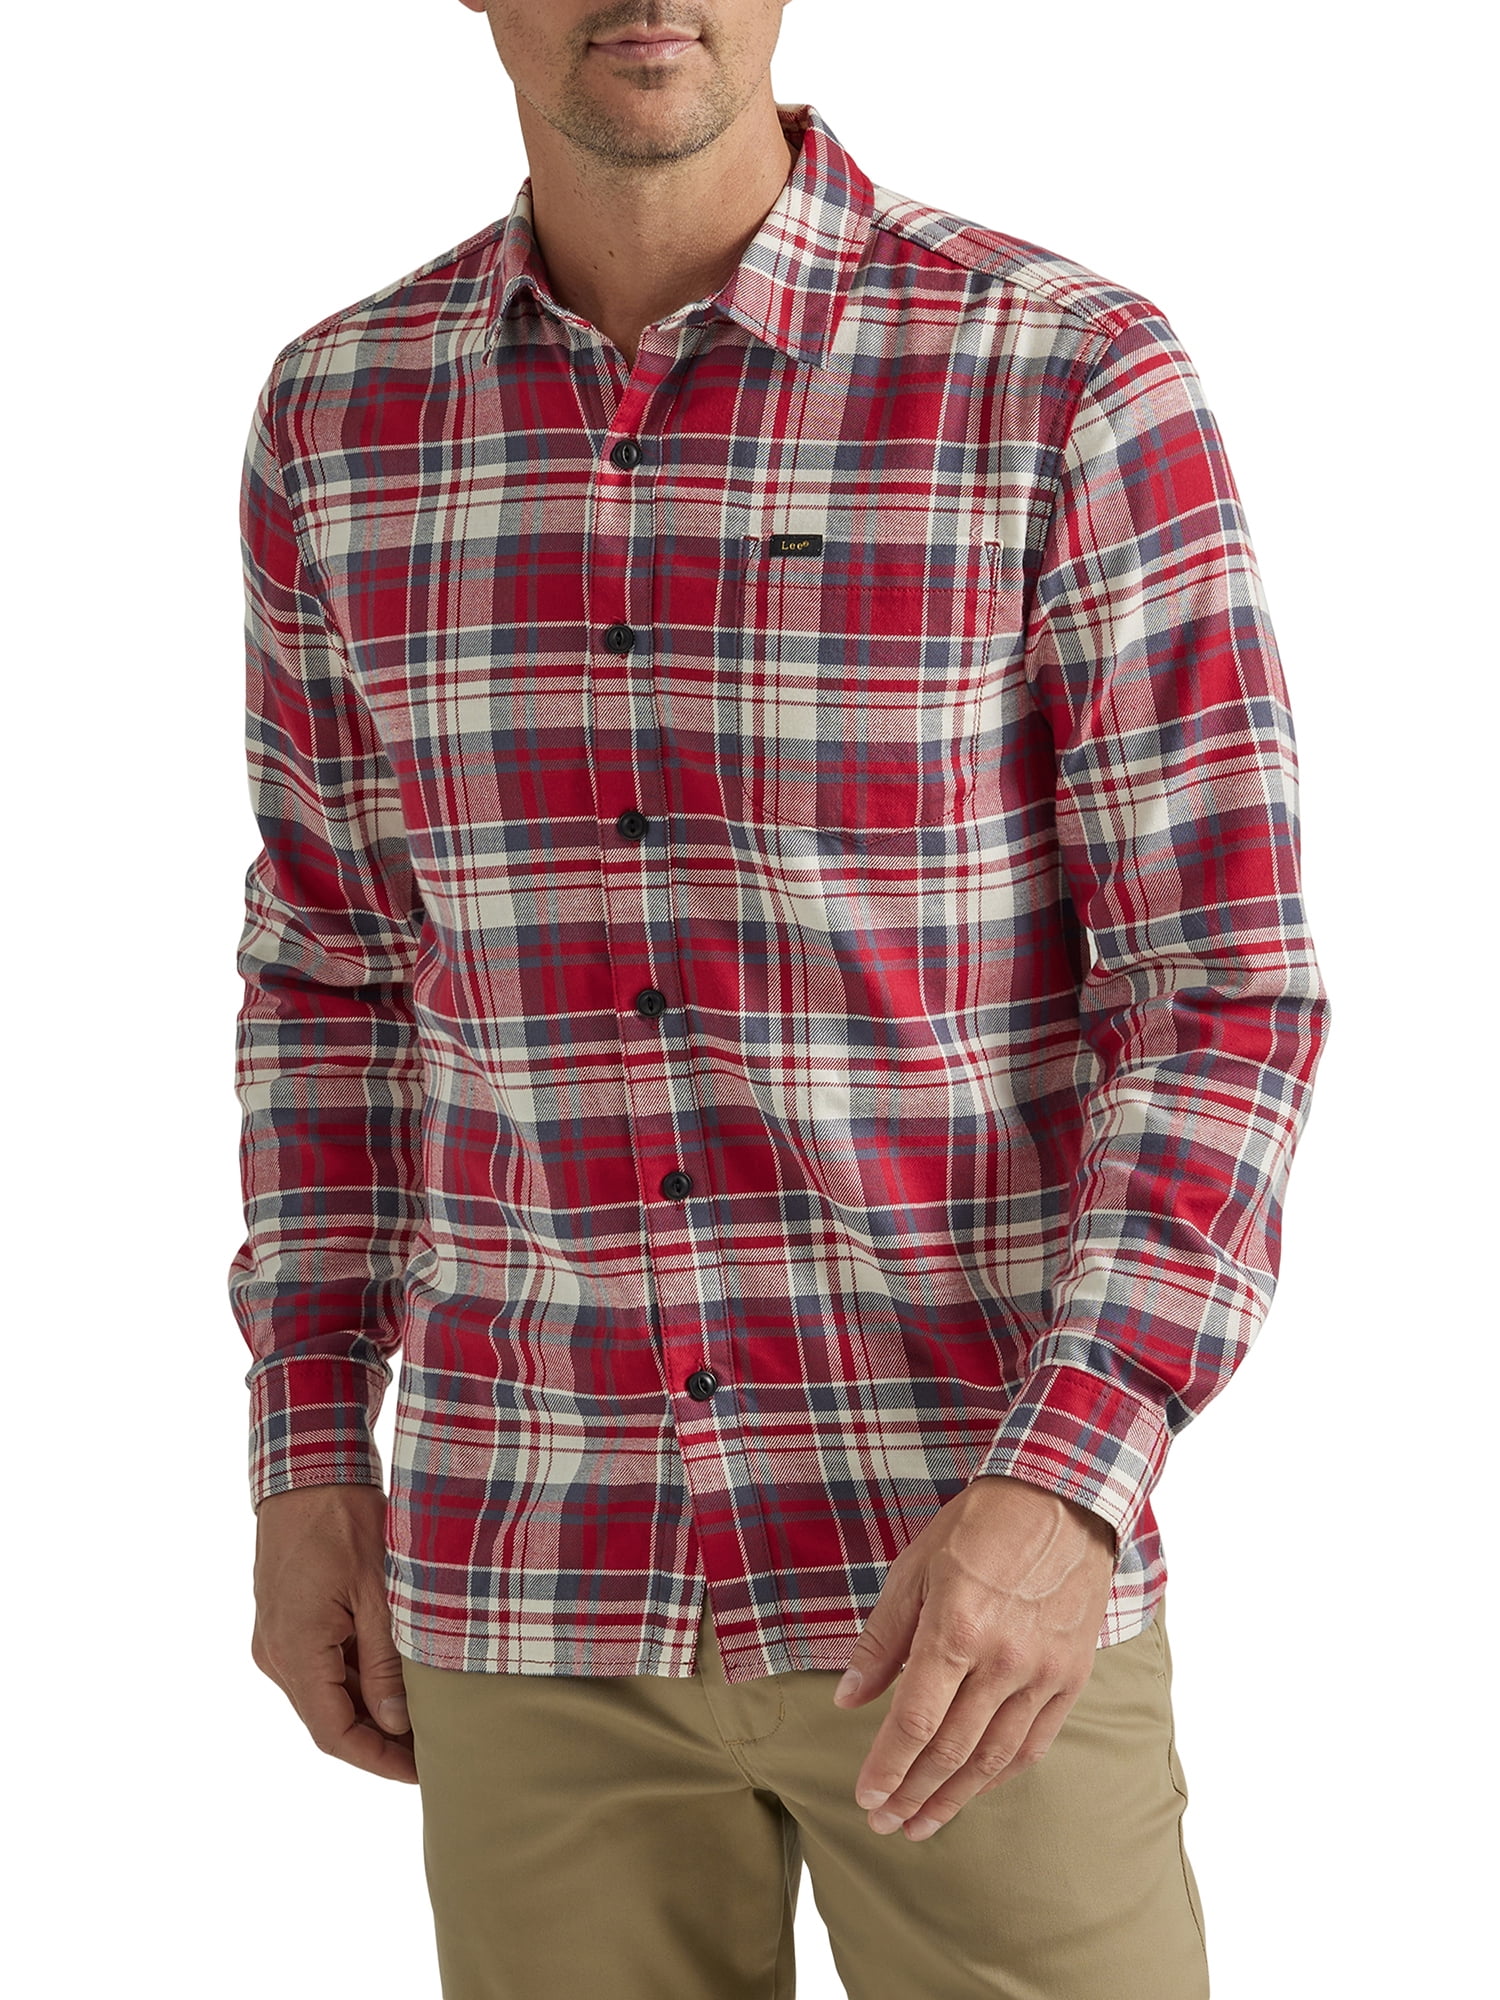 Lee Men's Stretch Flannel Shirt, 1x Gray Solid 1x Red Plaid, X-Large XL,  2-Pack